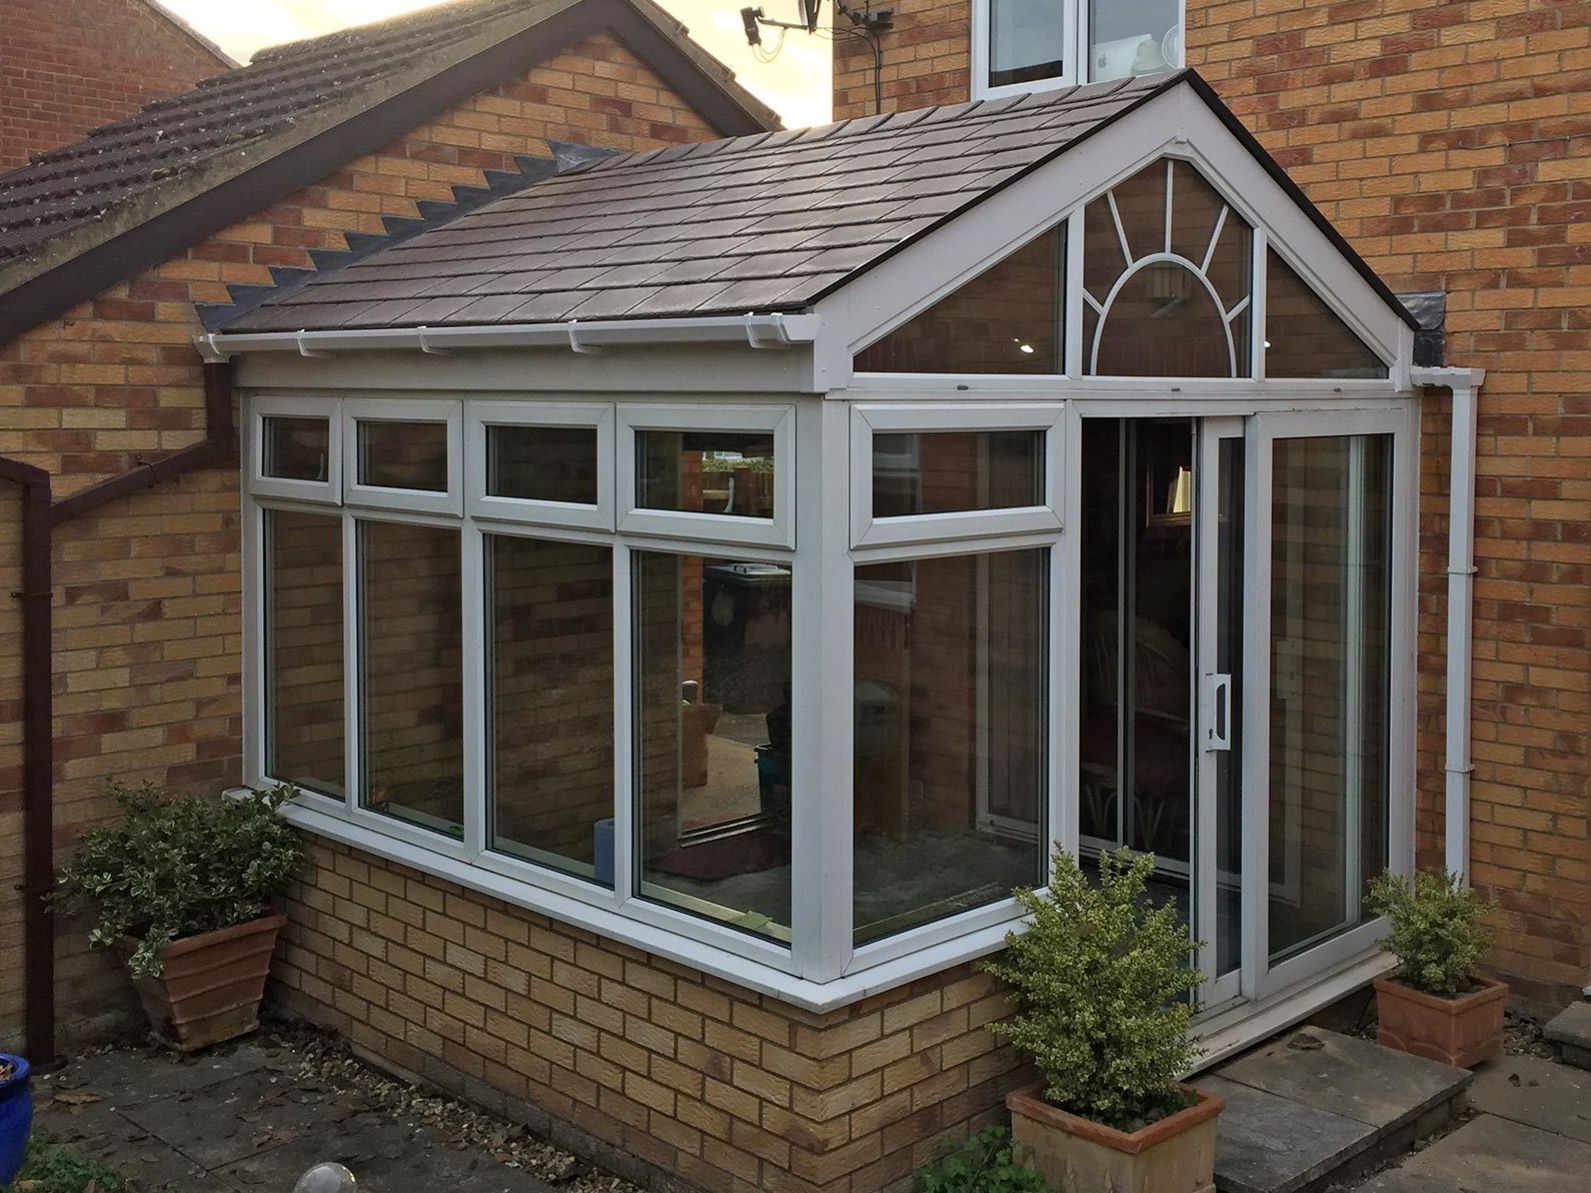 Gable fronted conservatory roof Northamptonshire